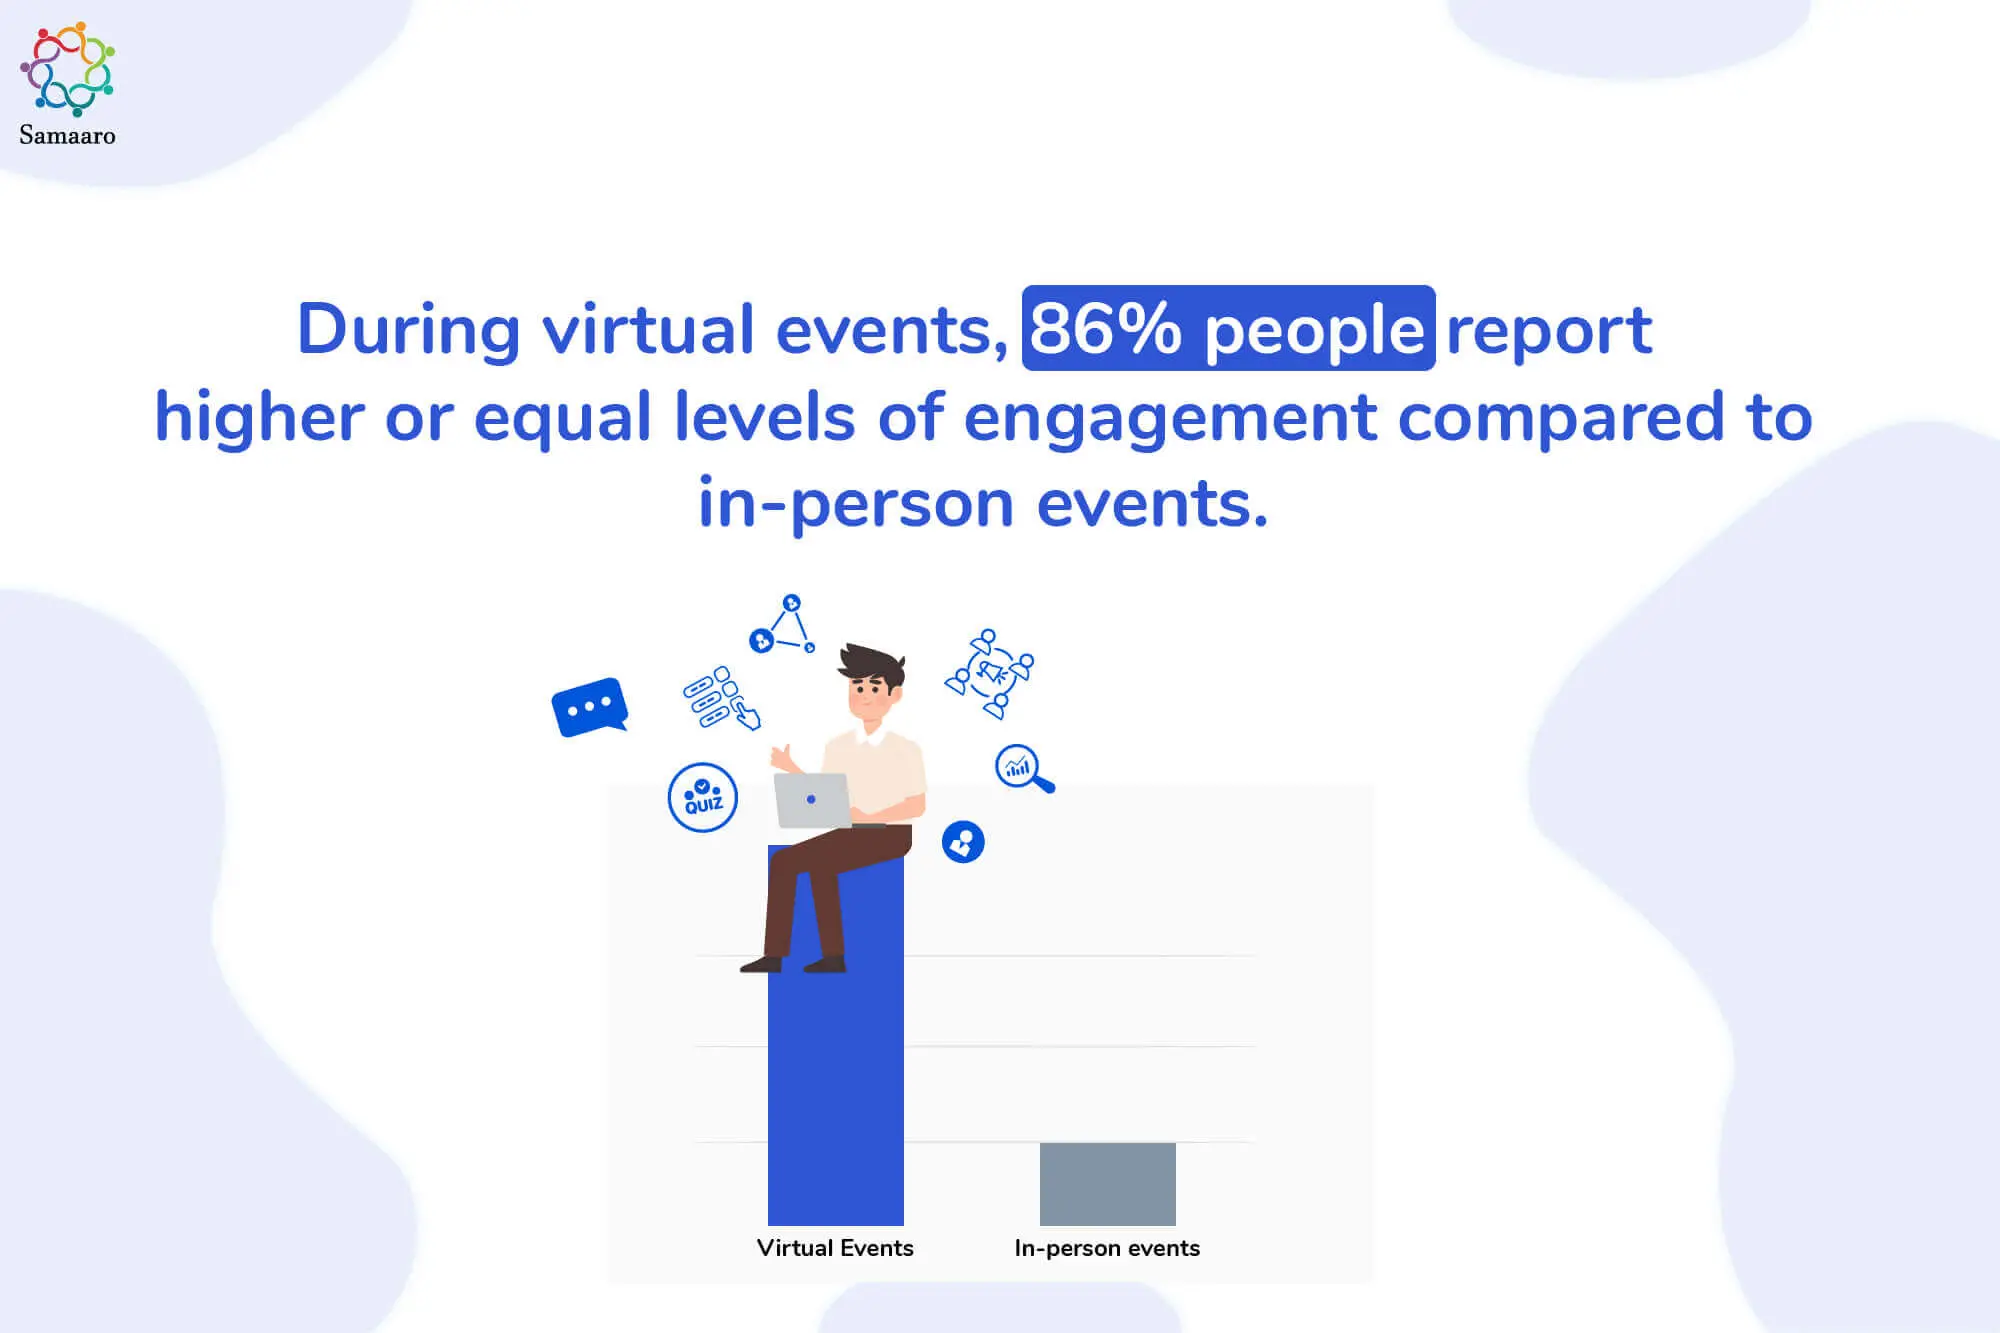 86% people reported high level of engagement